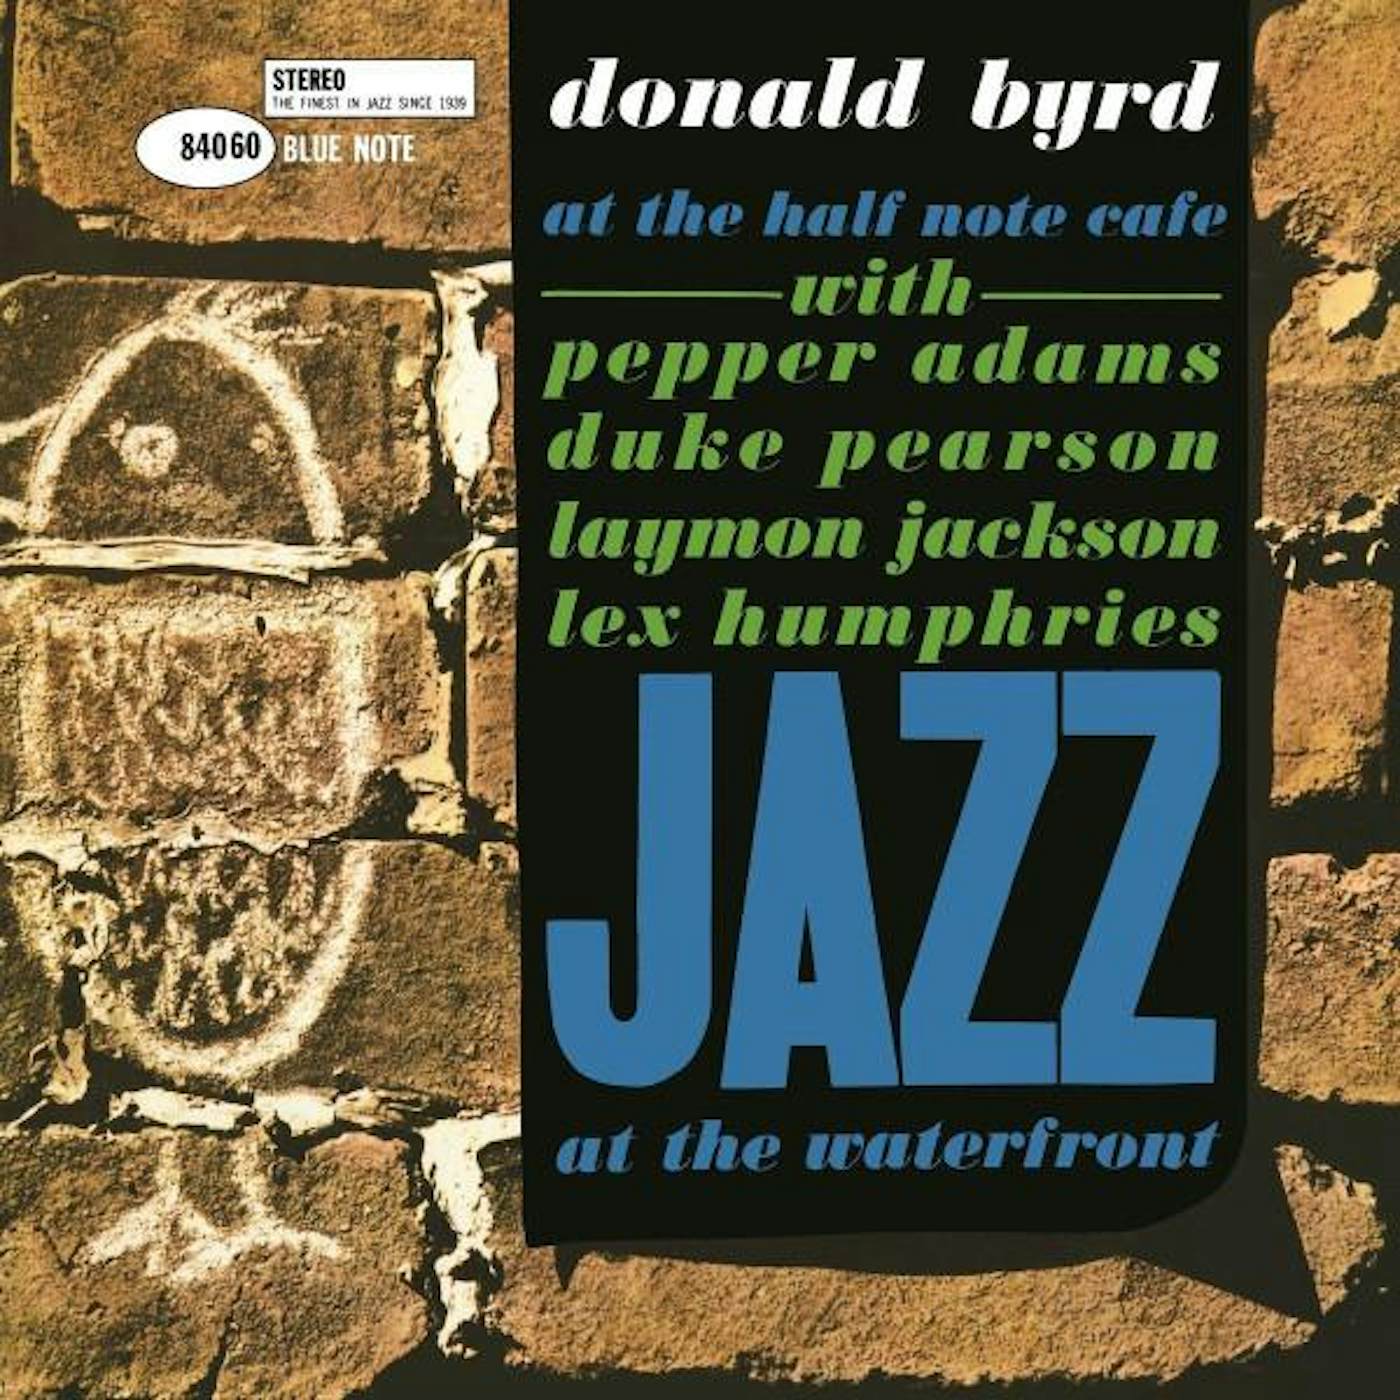 Donald Byrd AT THE HALF NOTE CAFE VOL.1 Vinyl Record